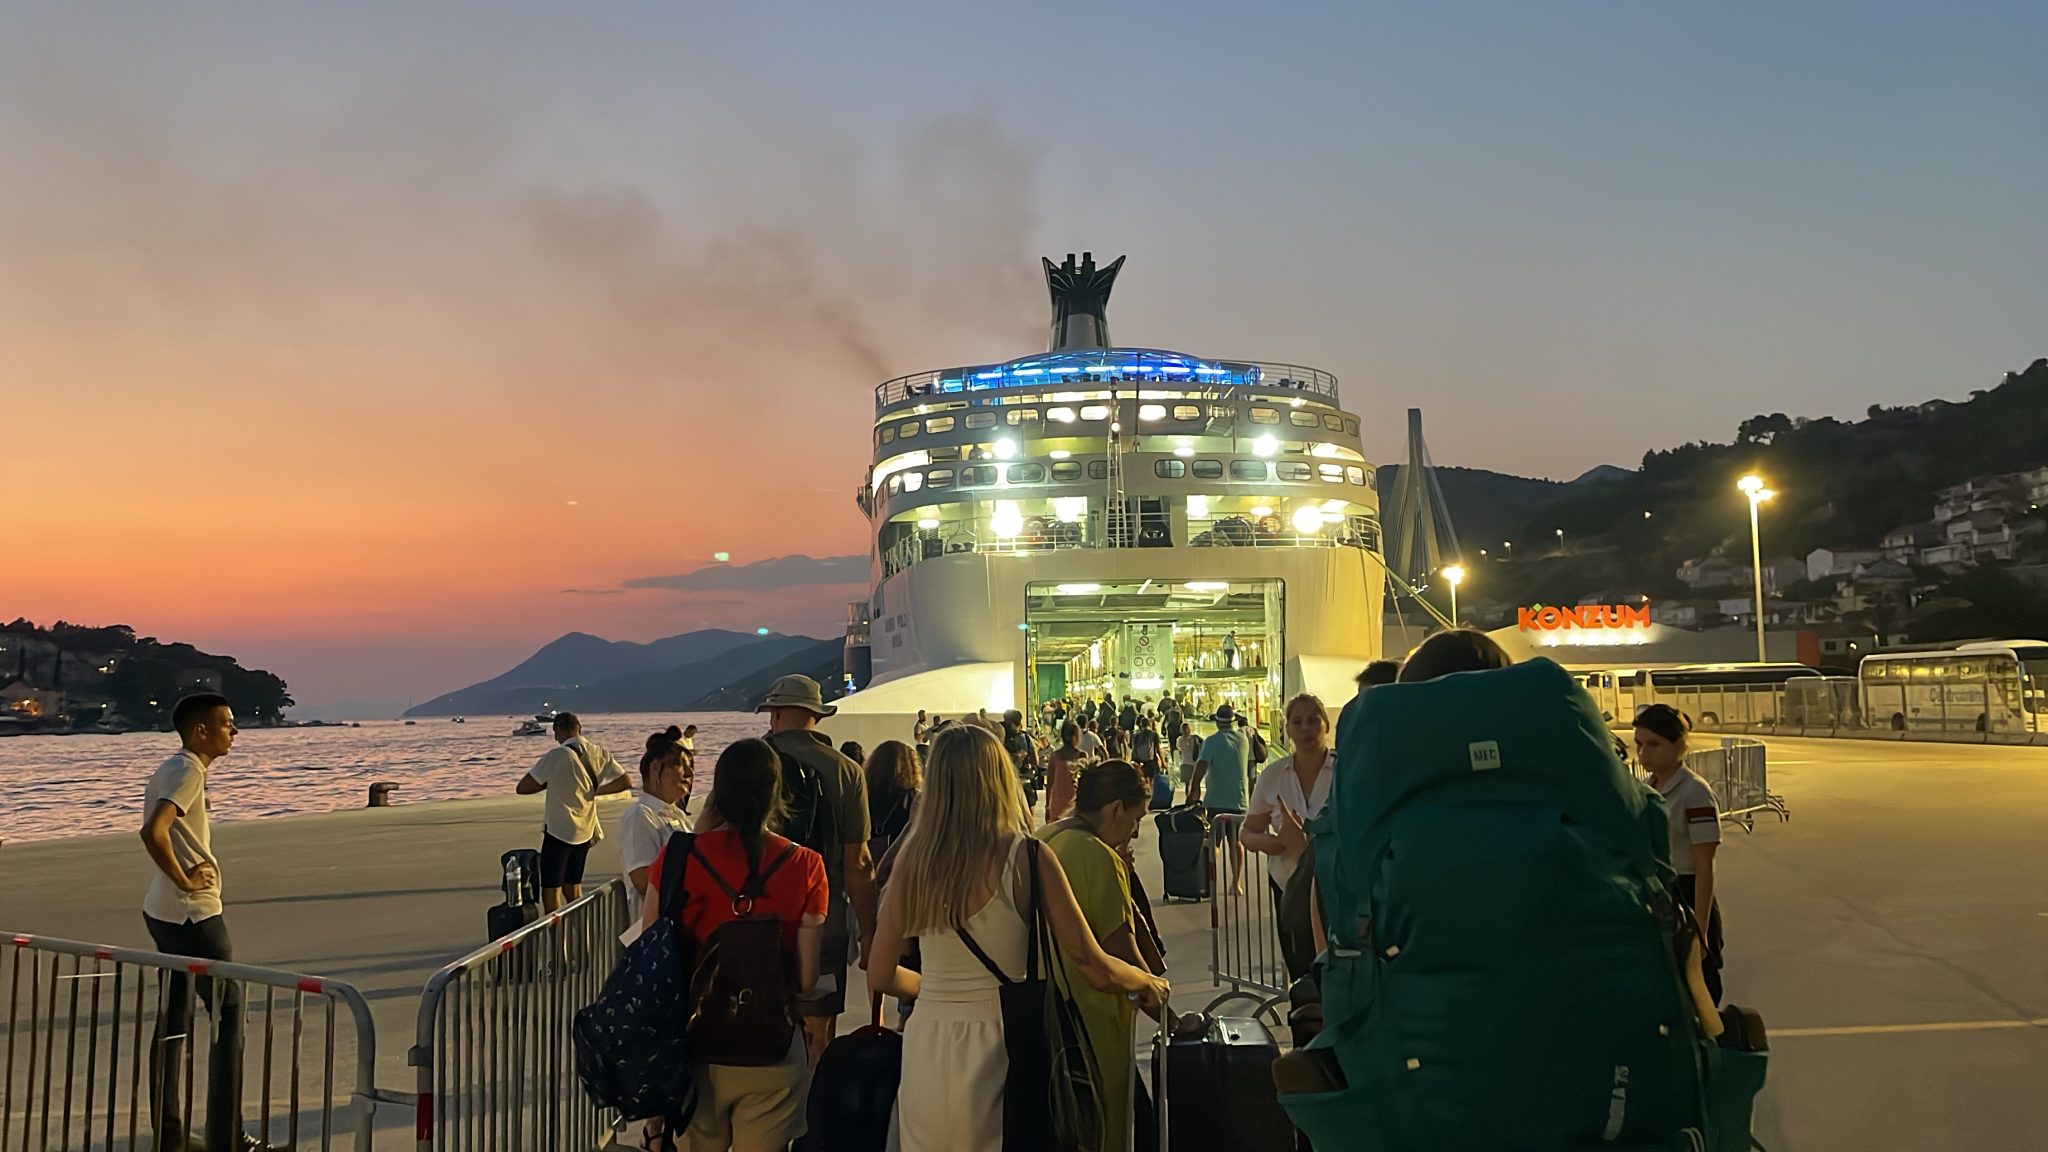 CROATIA TO ITALY OVERNIGHT FERRY: EVERYTHING YOU NEED TO KNOW!